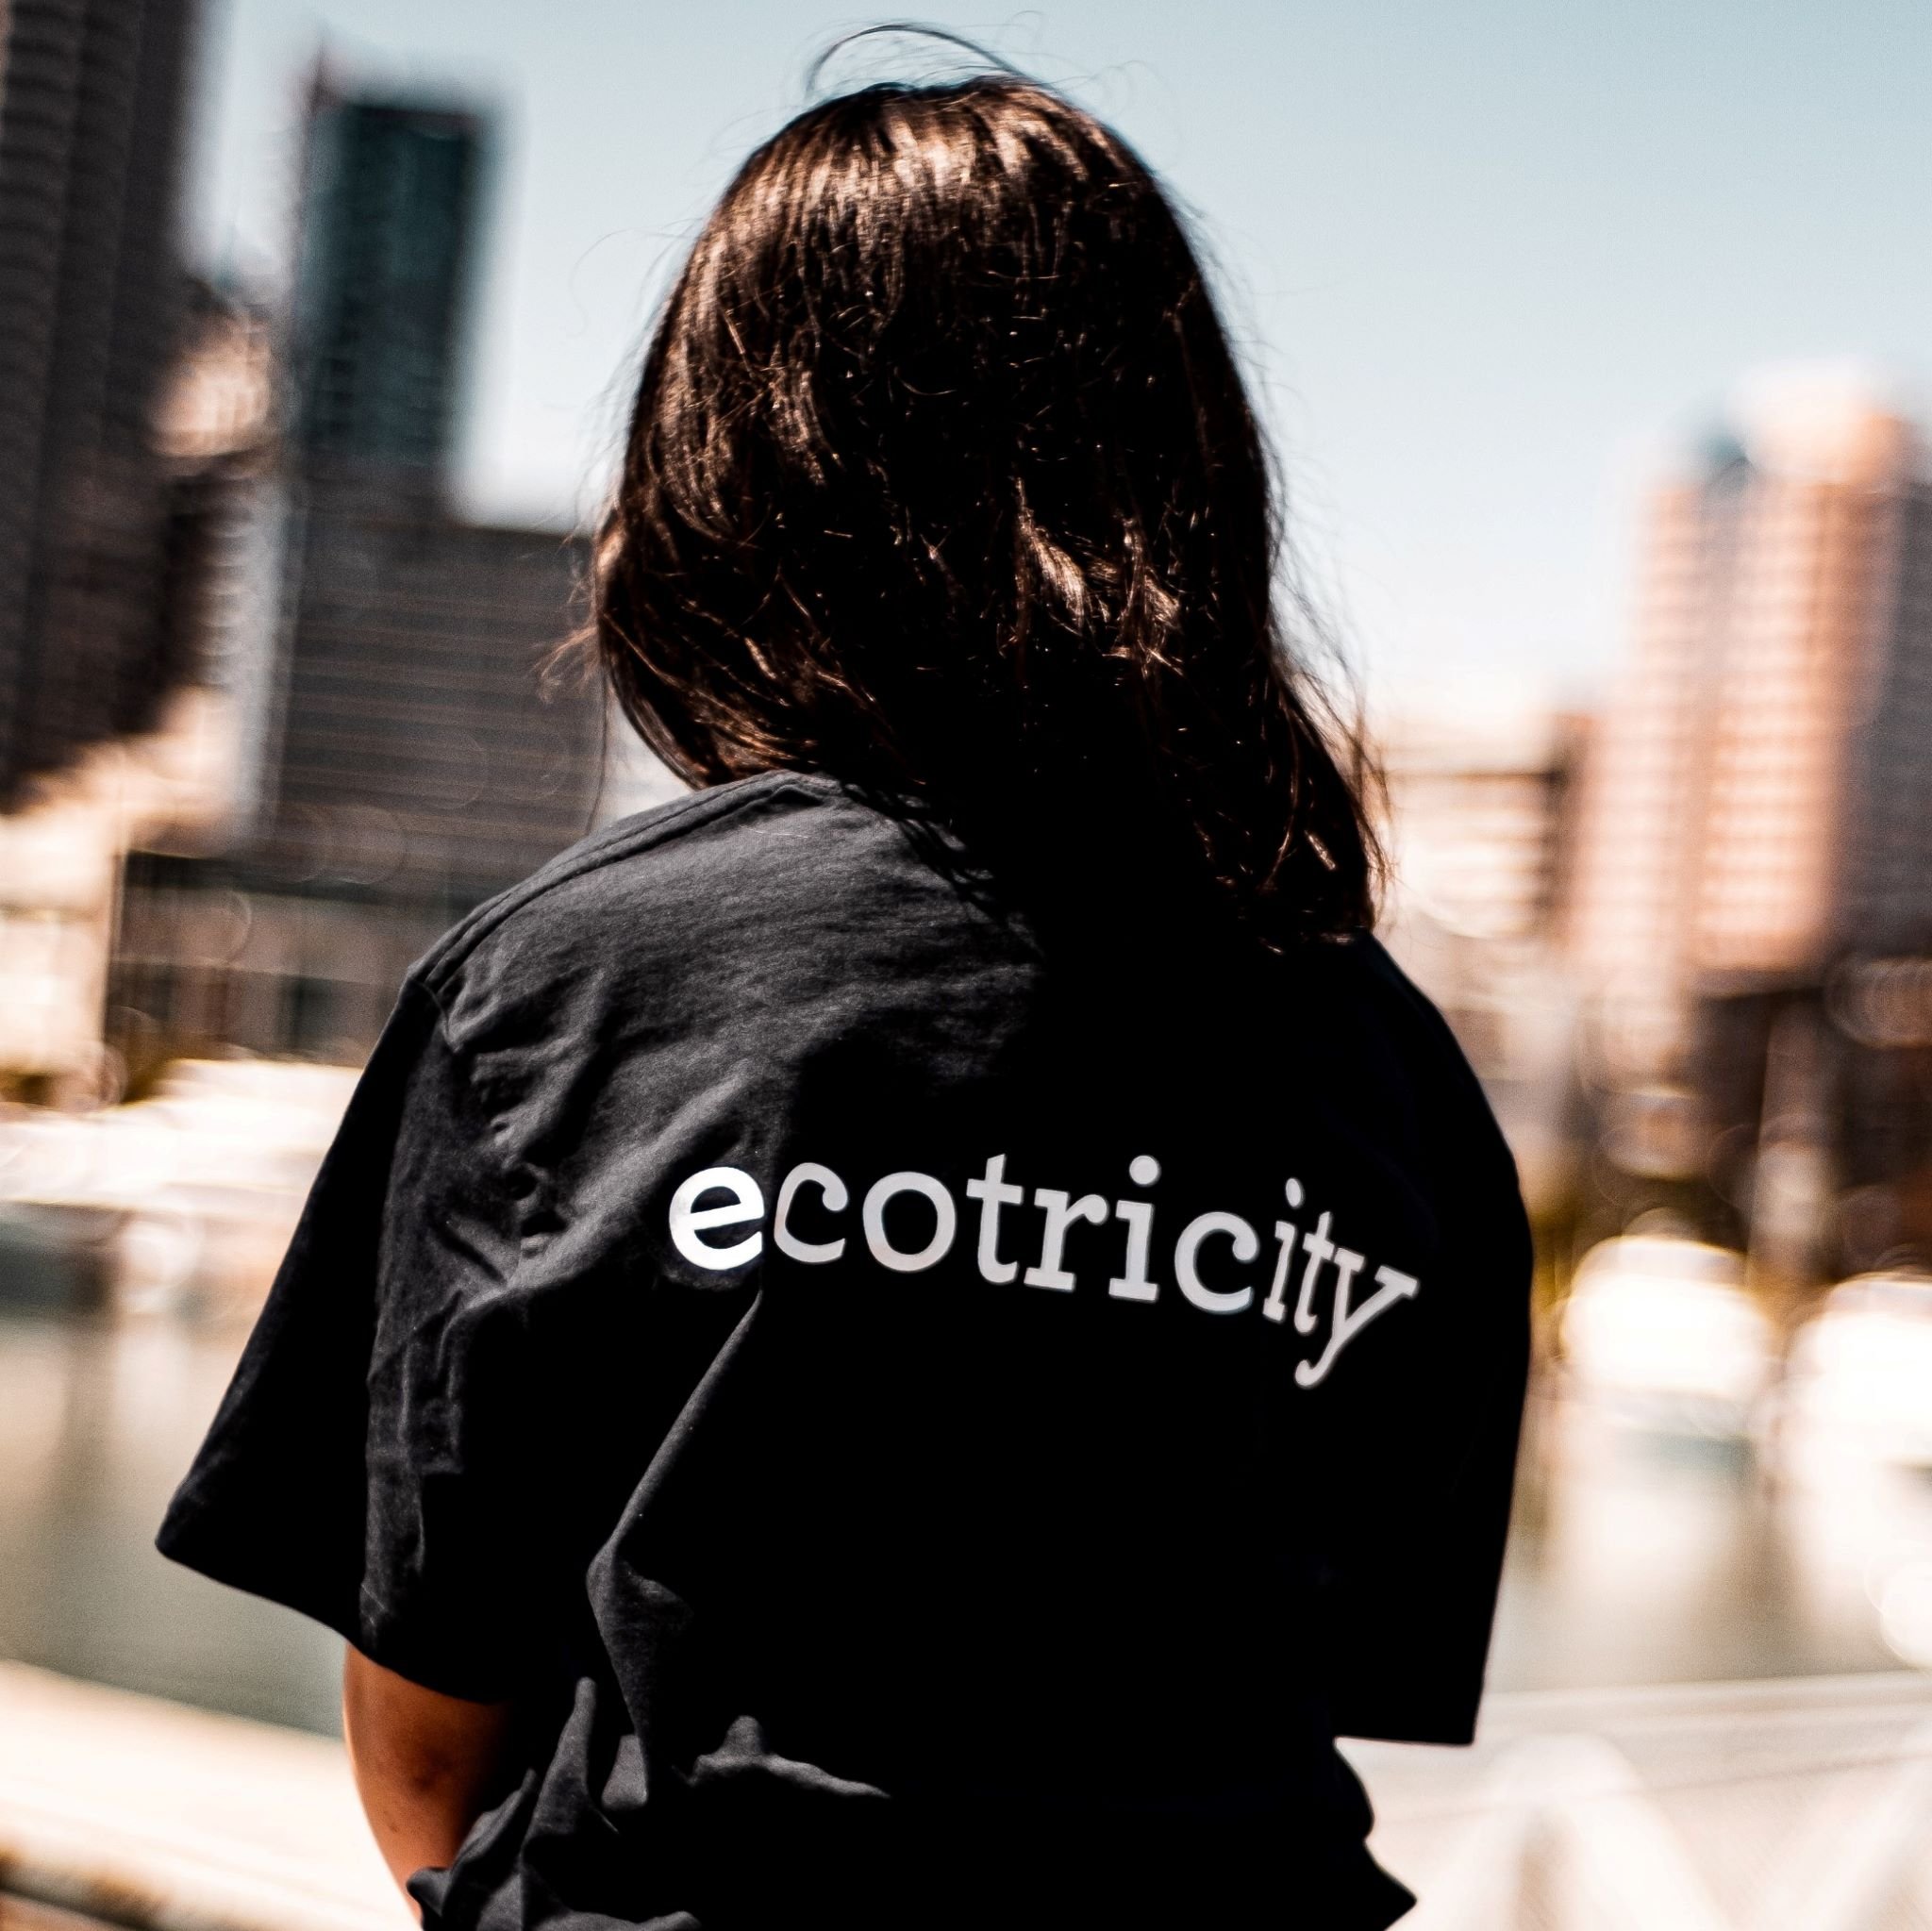 Ecotricity Girl crop small